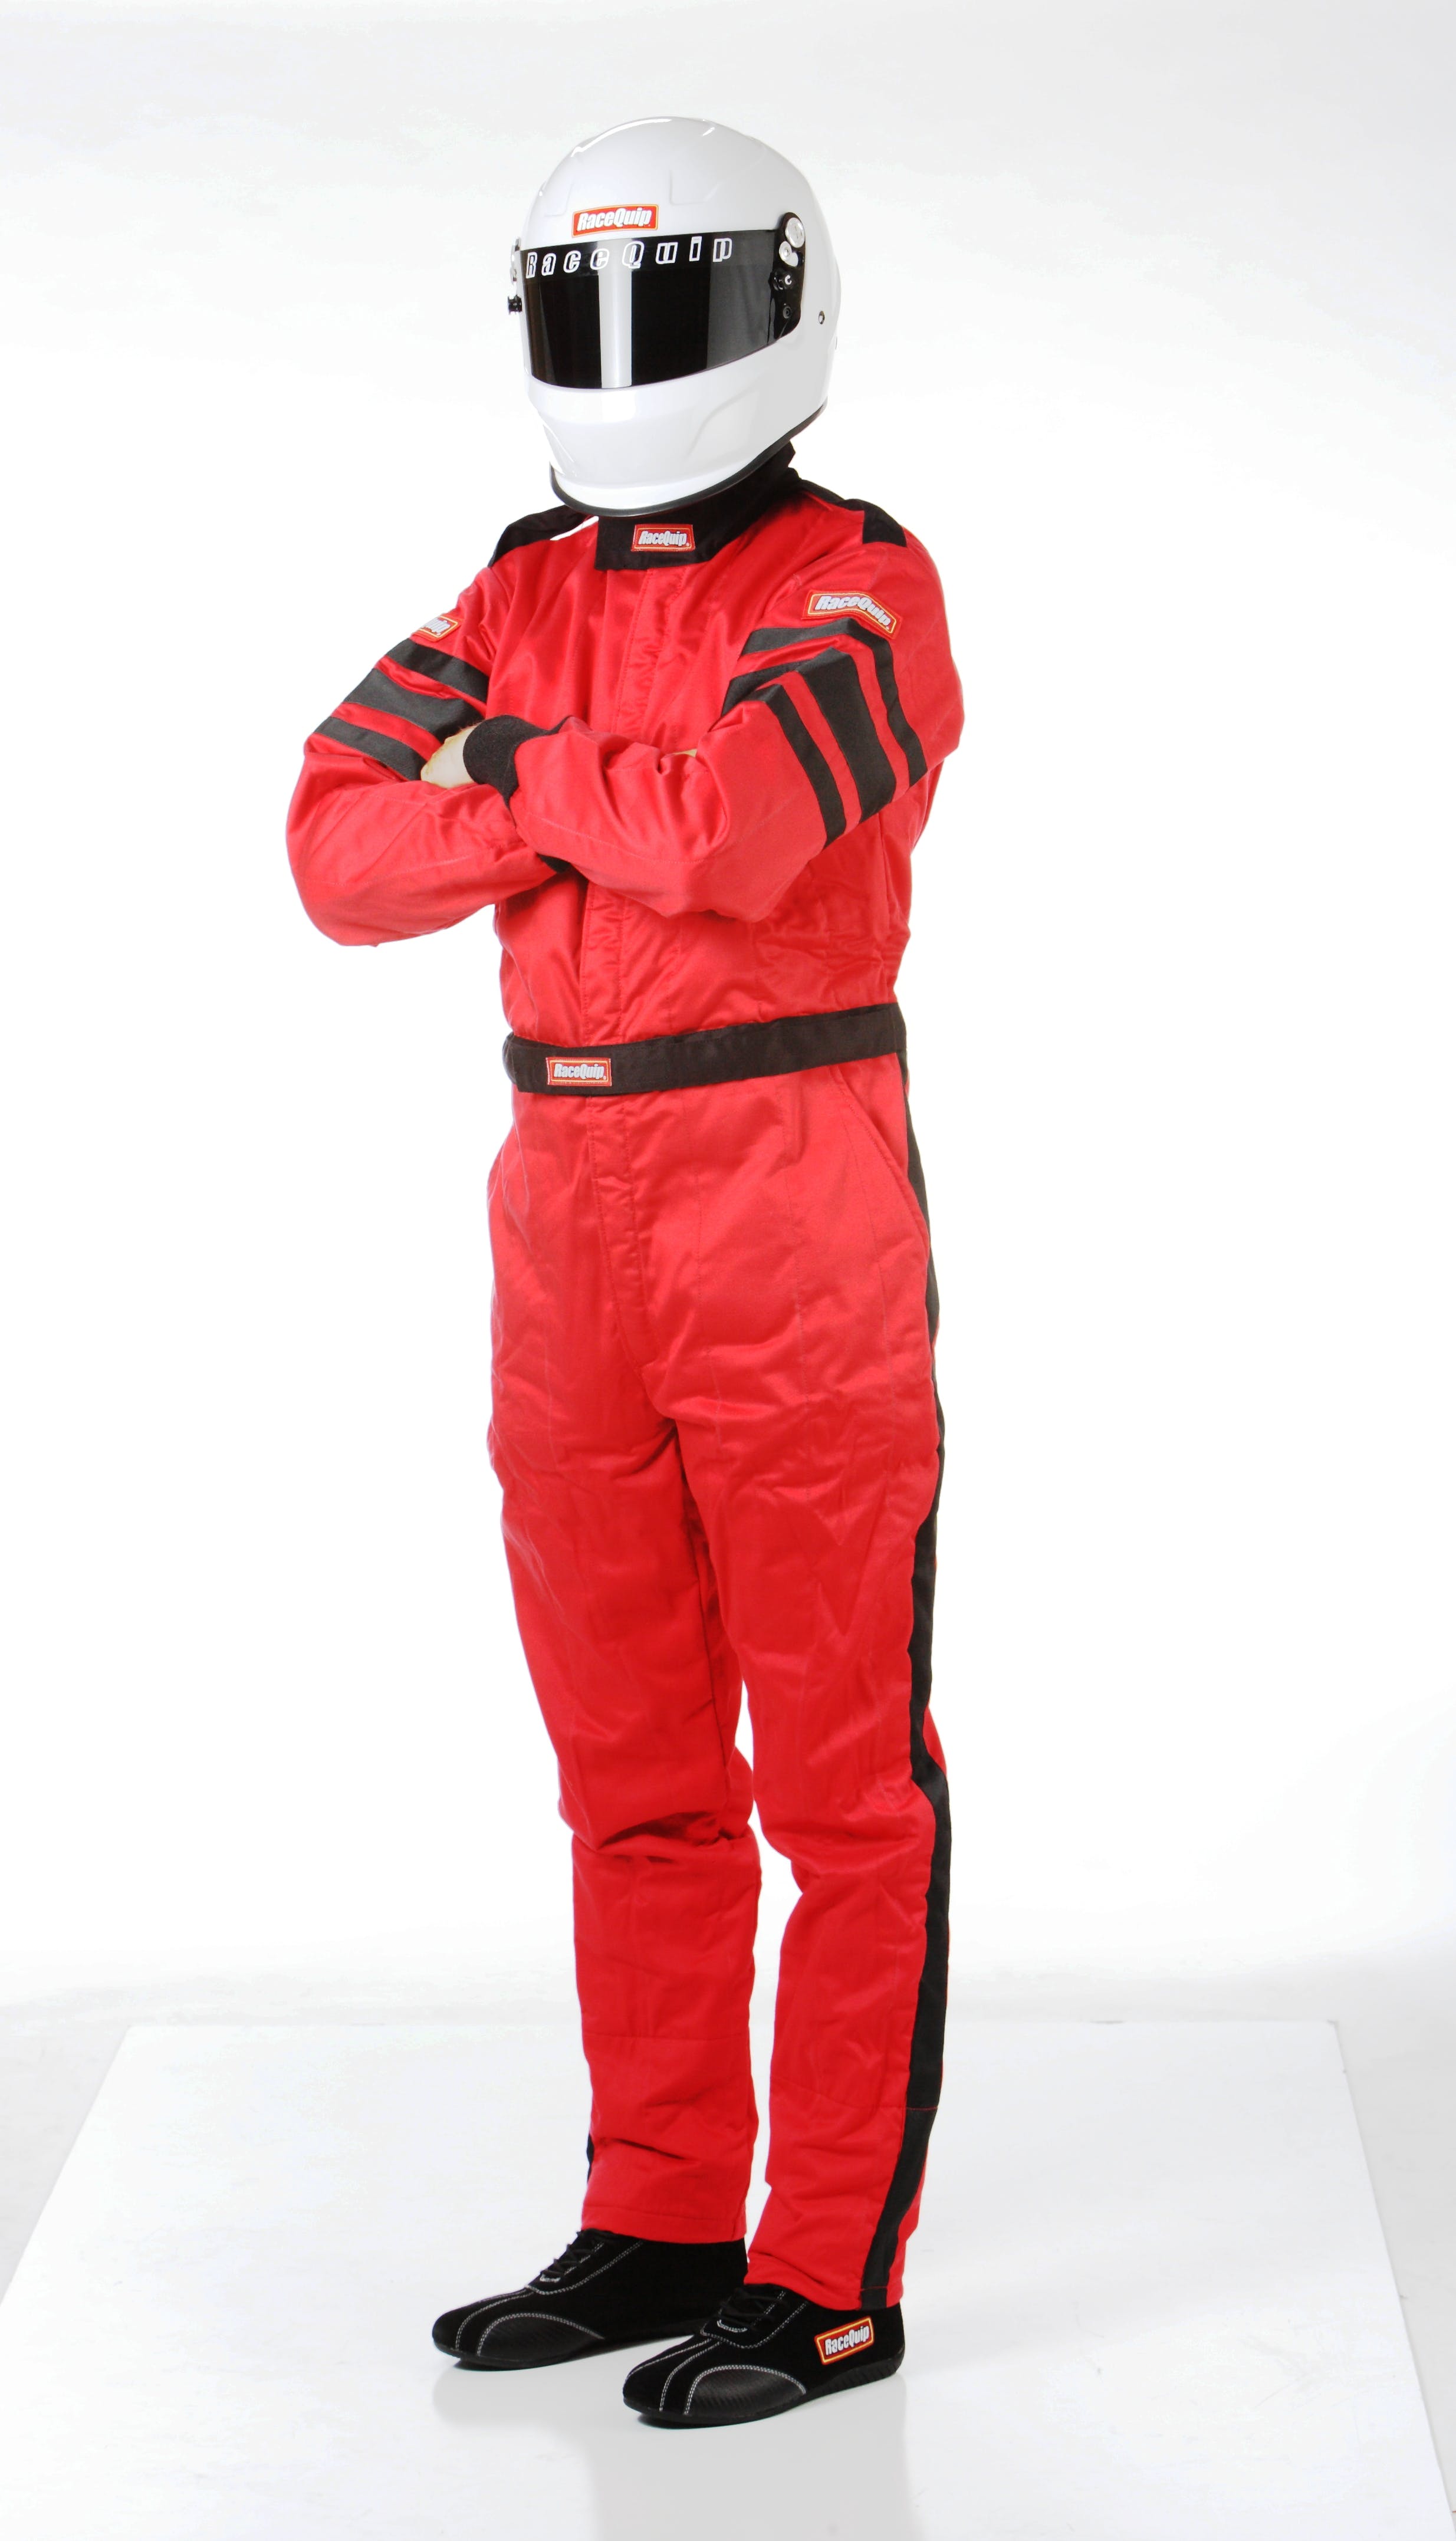 RaceQuip 120014 SFI-5 Pyrovatex One-Piece Multi-Layer Racing Fire Suit (Red, Medium-Tall)